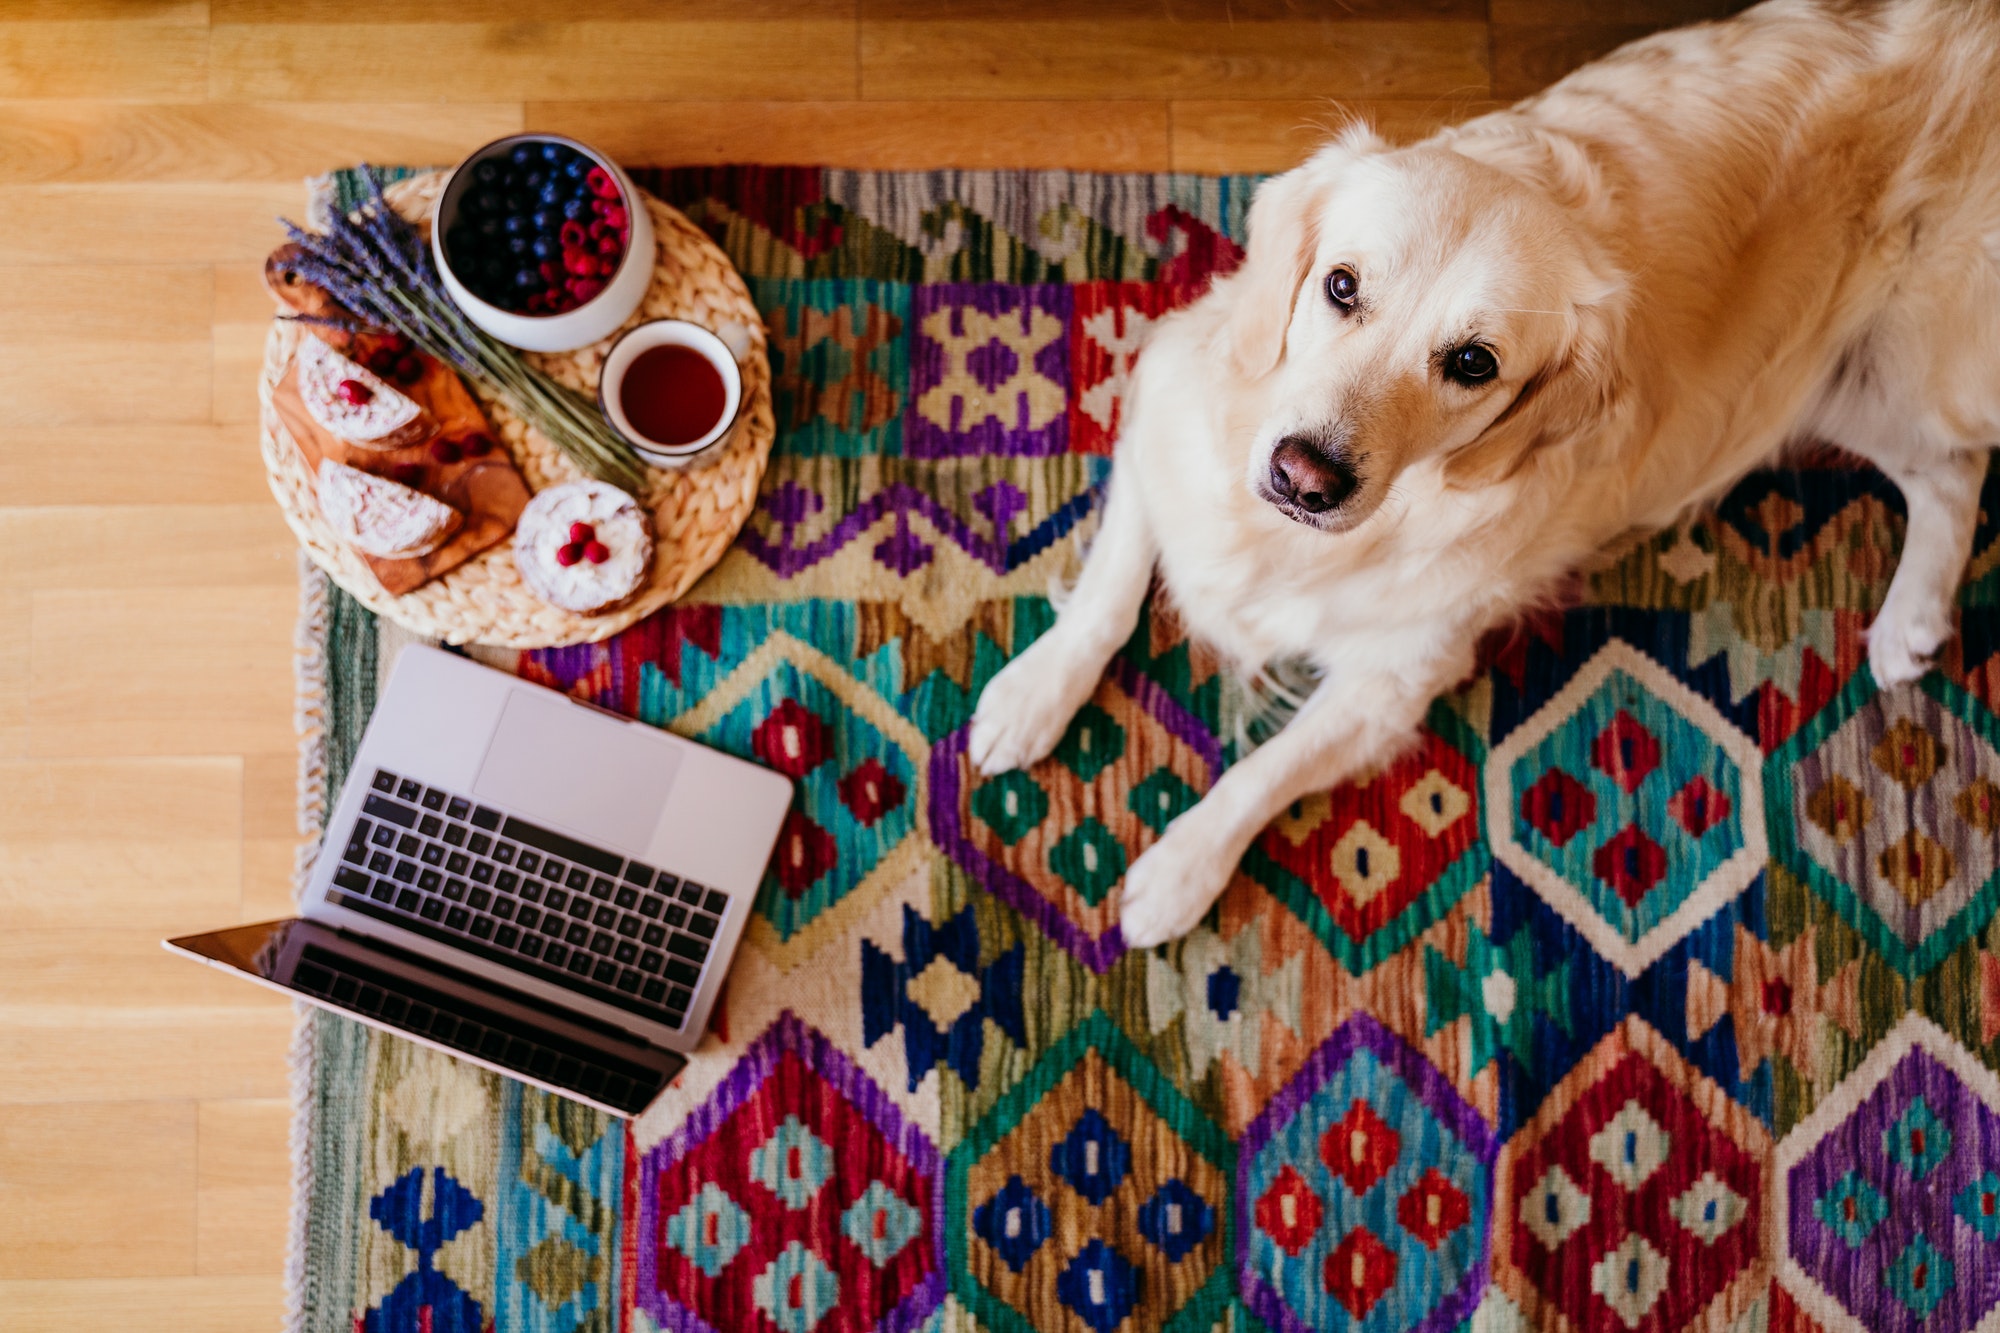 cute golden retriever dog at home working on laptop. Healthy breakfast besides. Dogs and technology